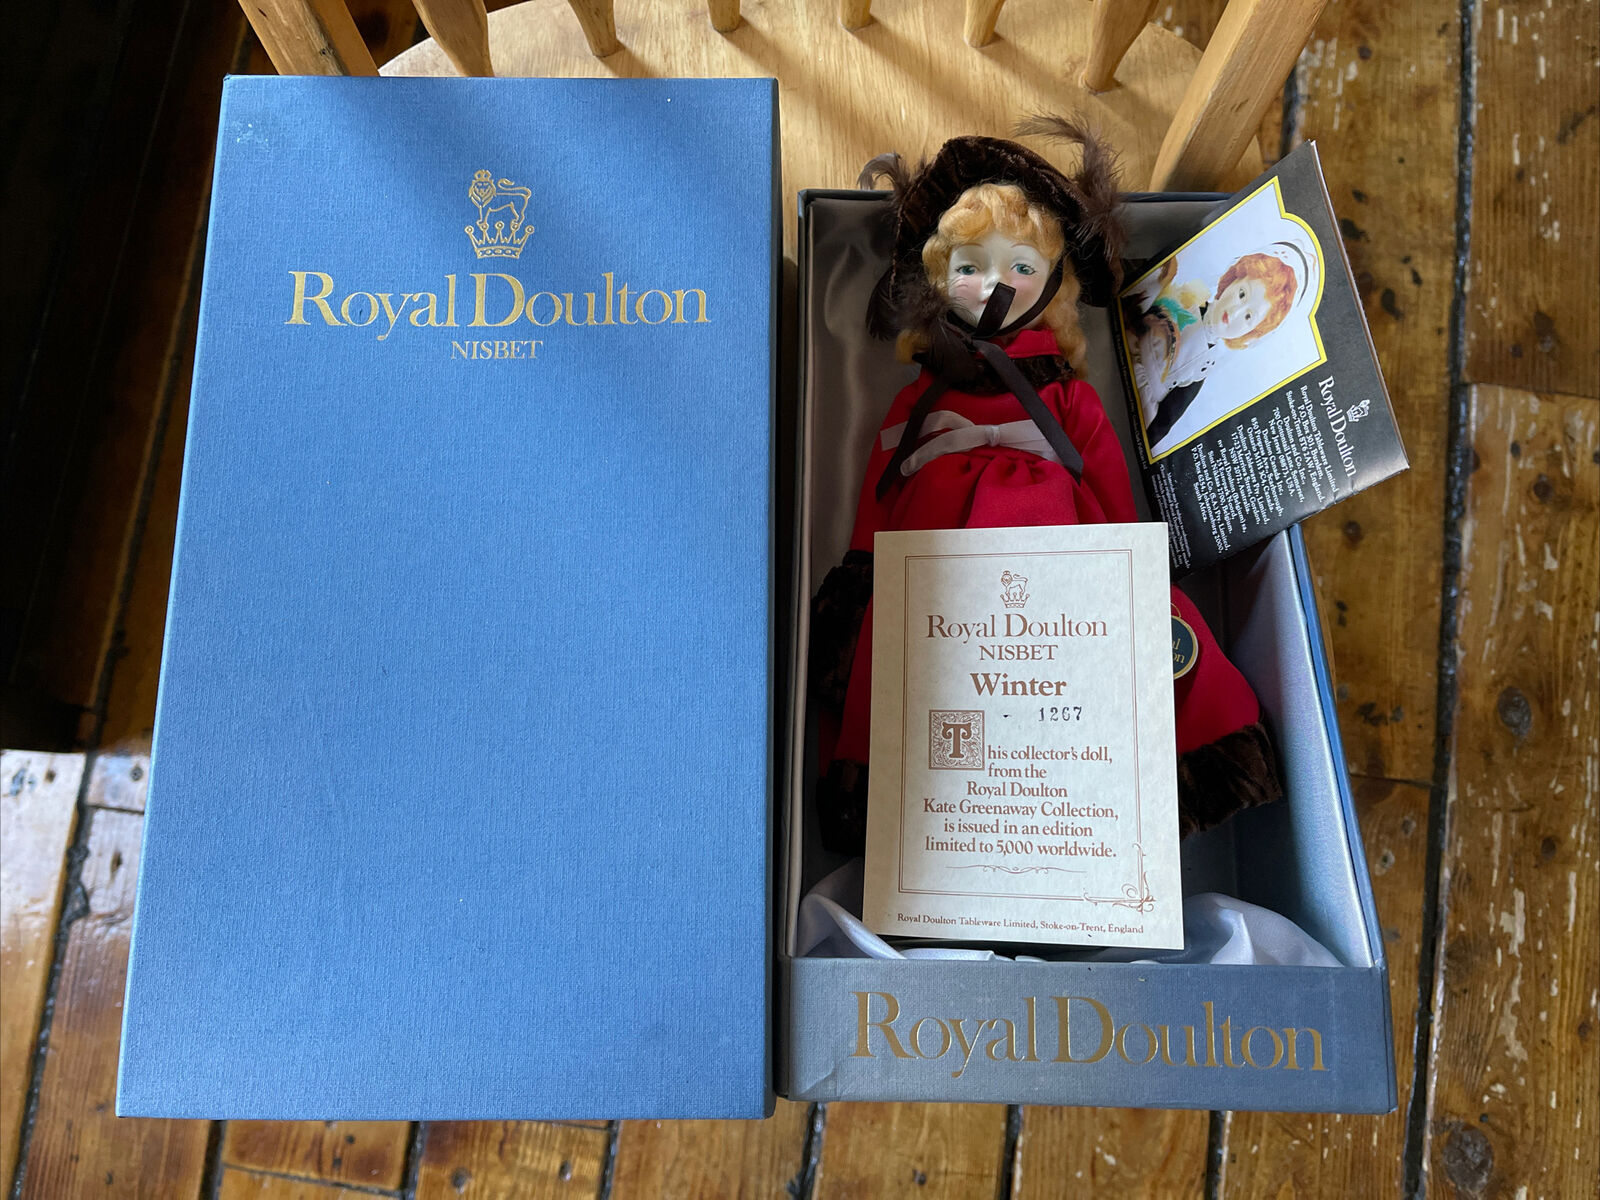 Royal Doulton House of Nisbet Collector\'s Doll Kate Greenaway Winter in Box 1981